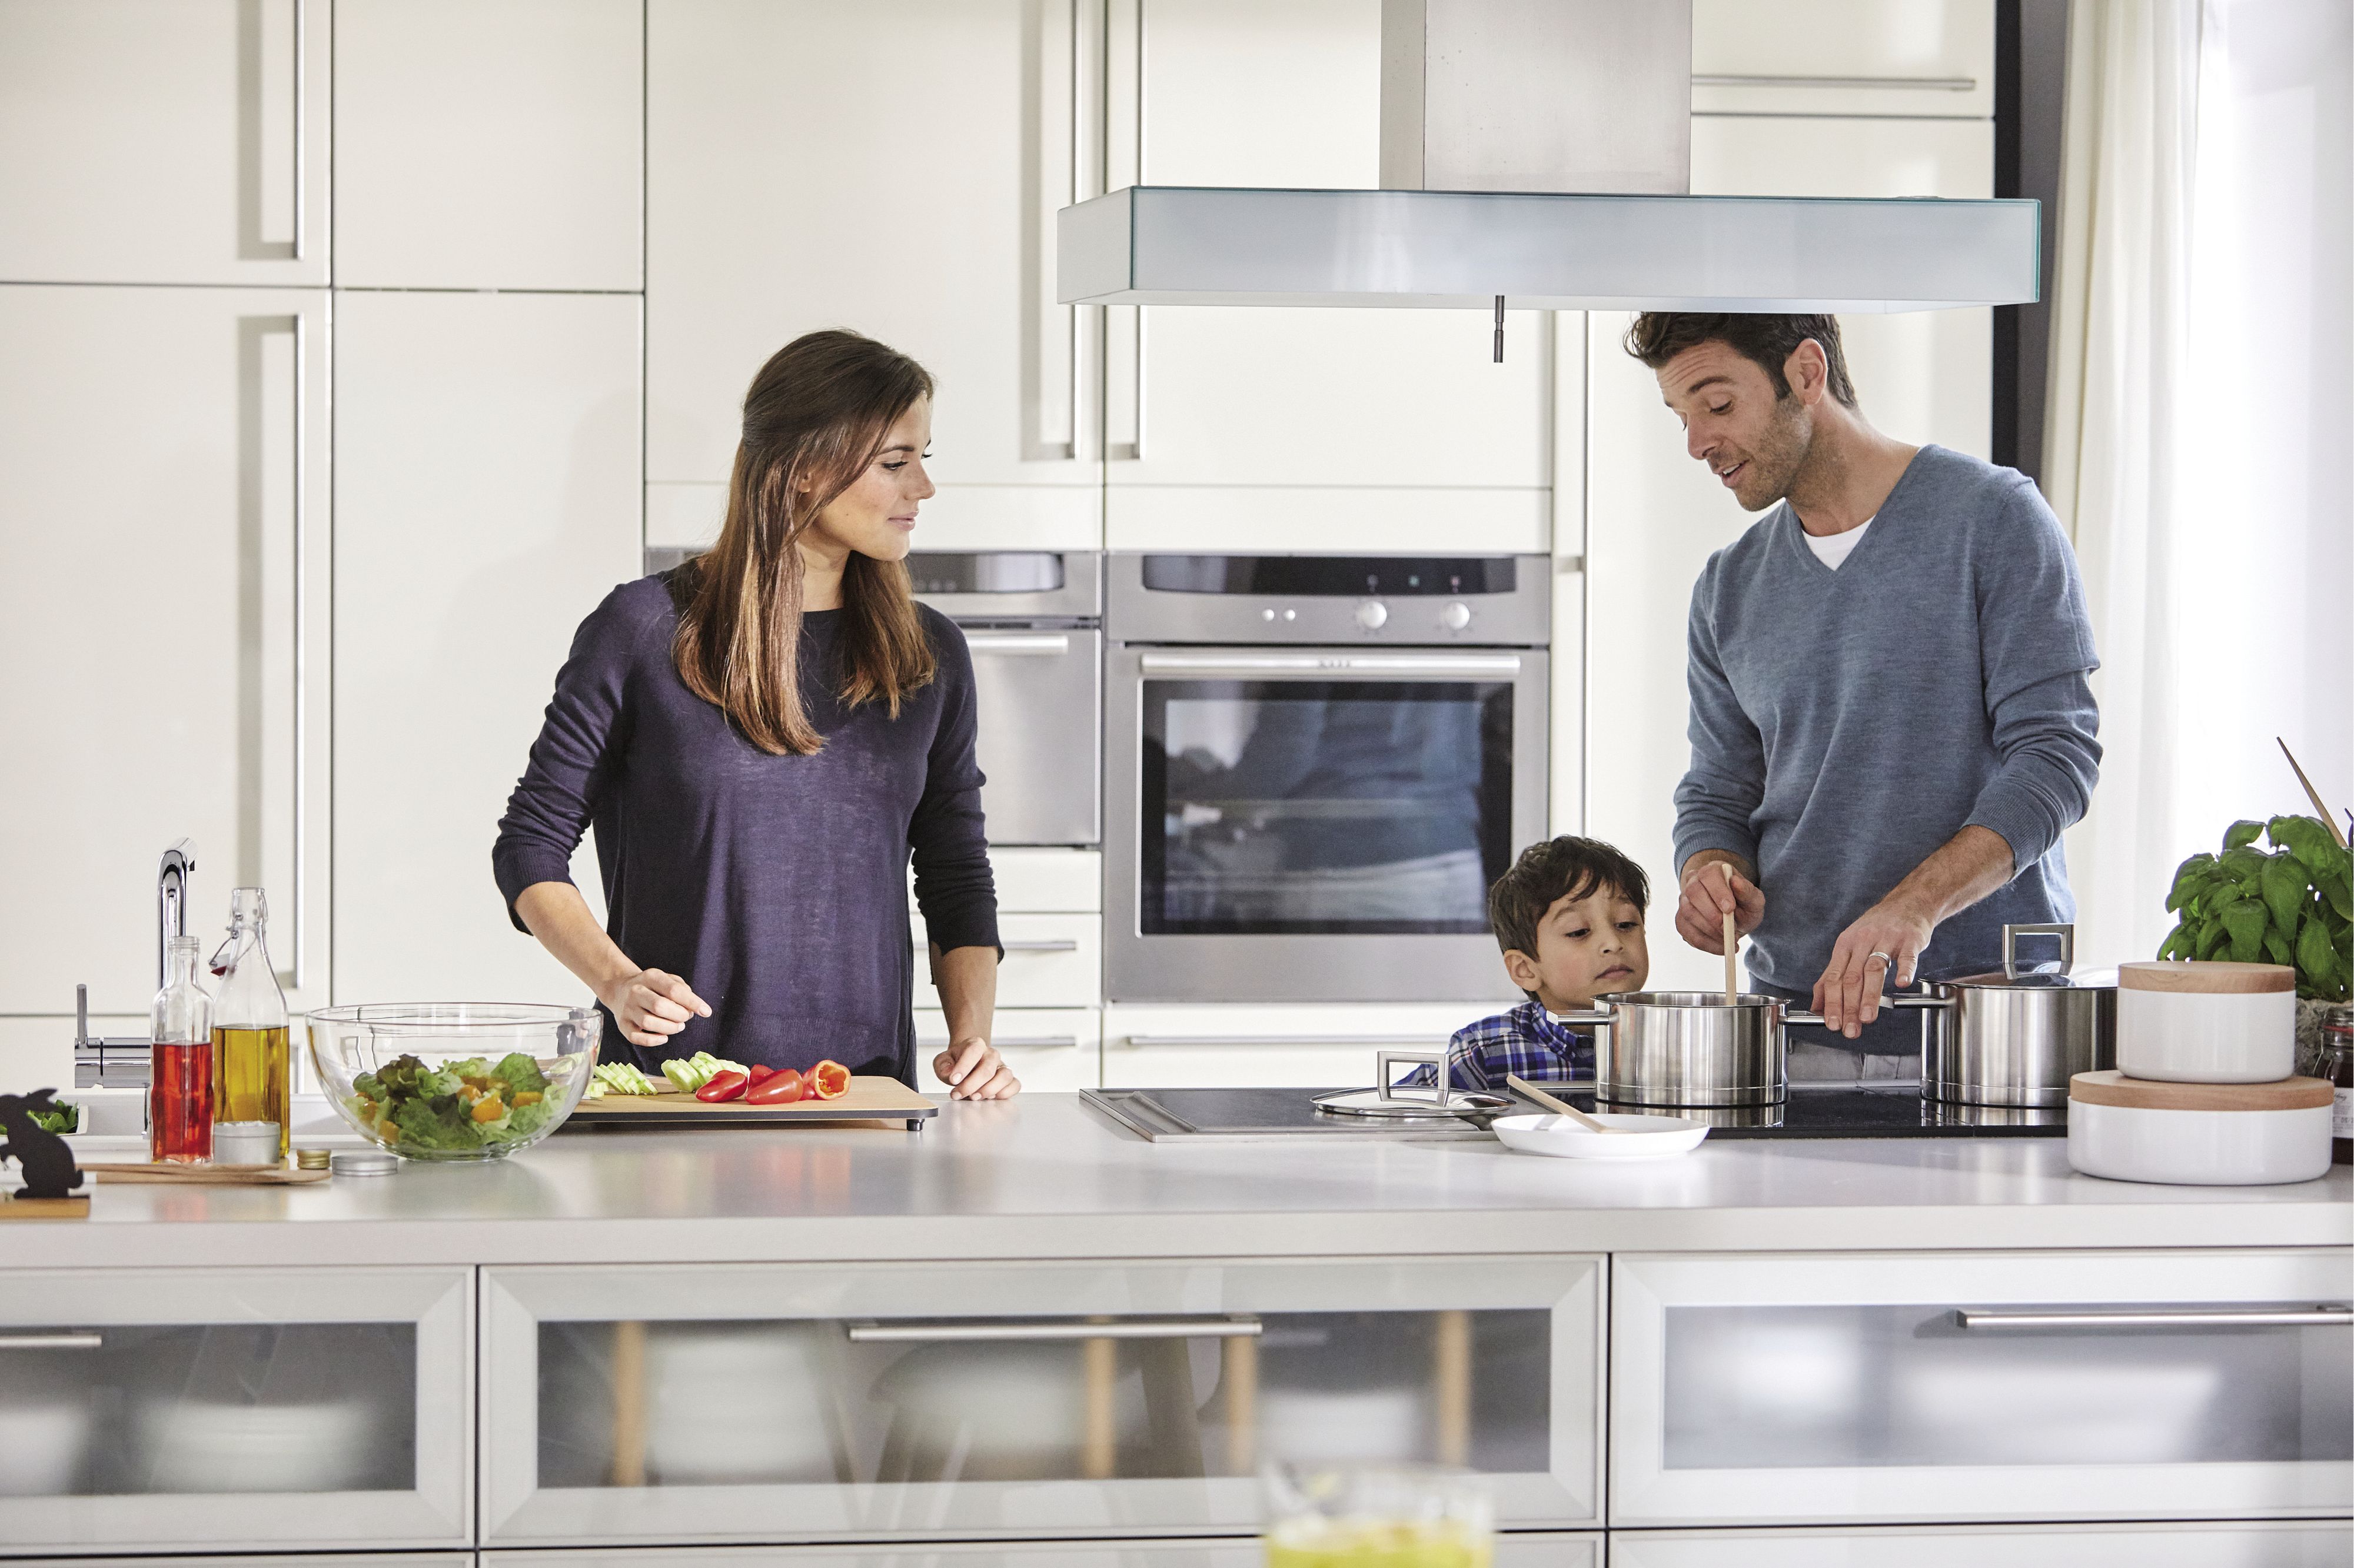 A spacious kitchen island makes it even more fun to cook together with your family.